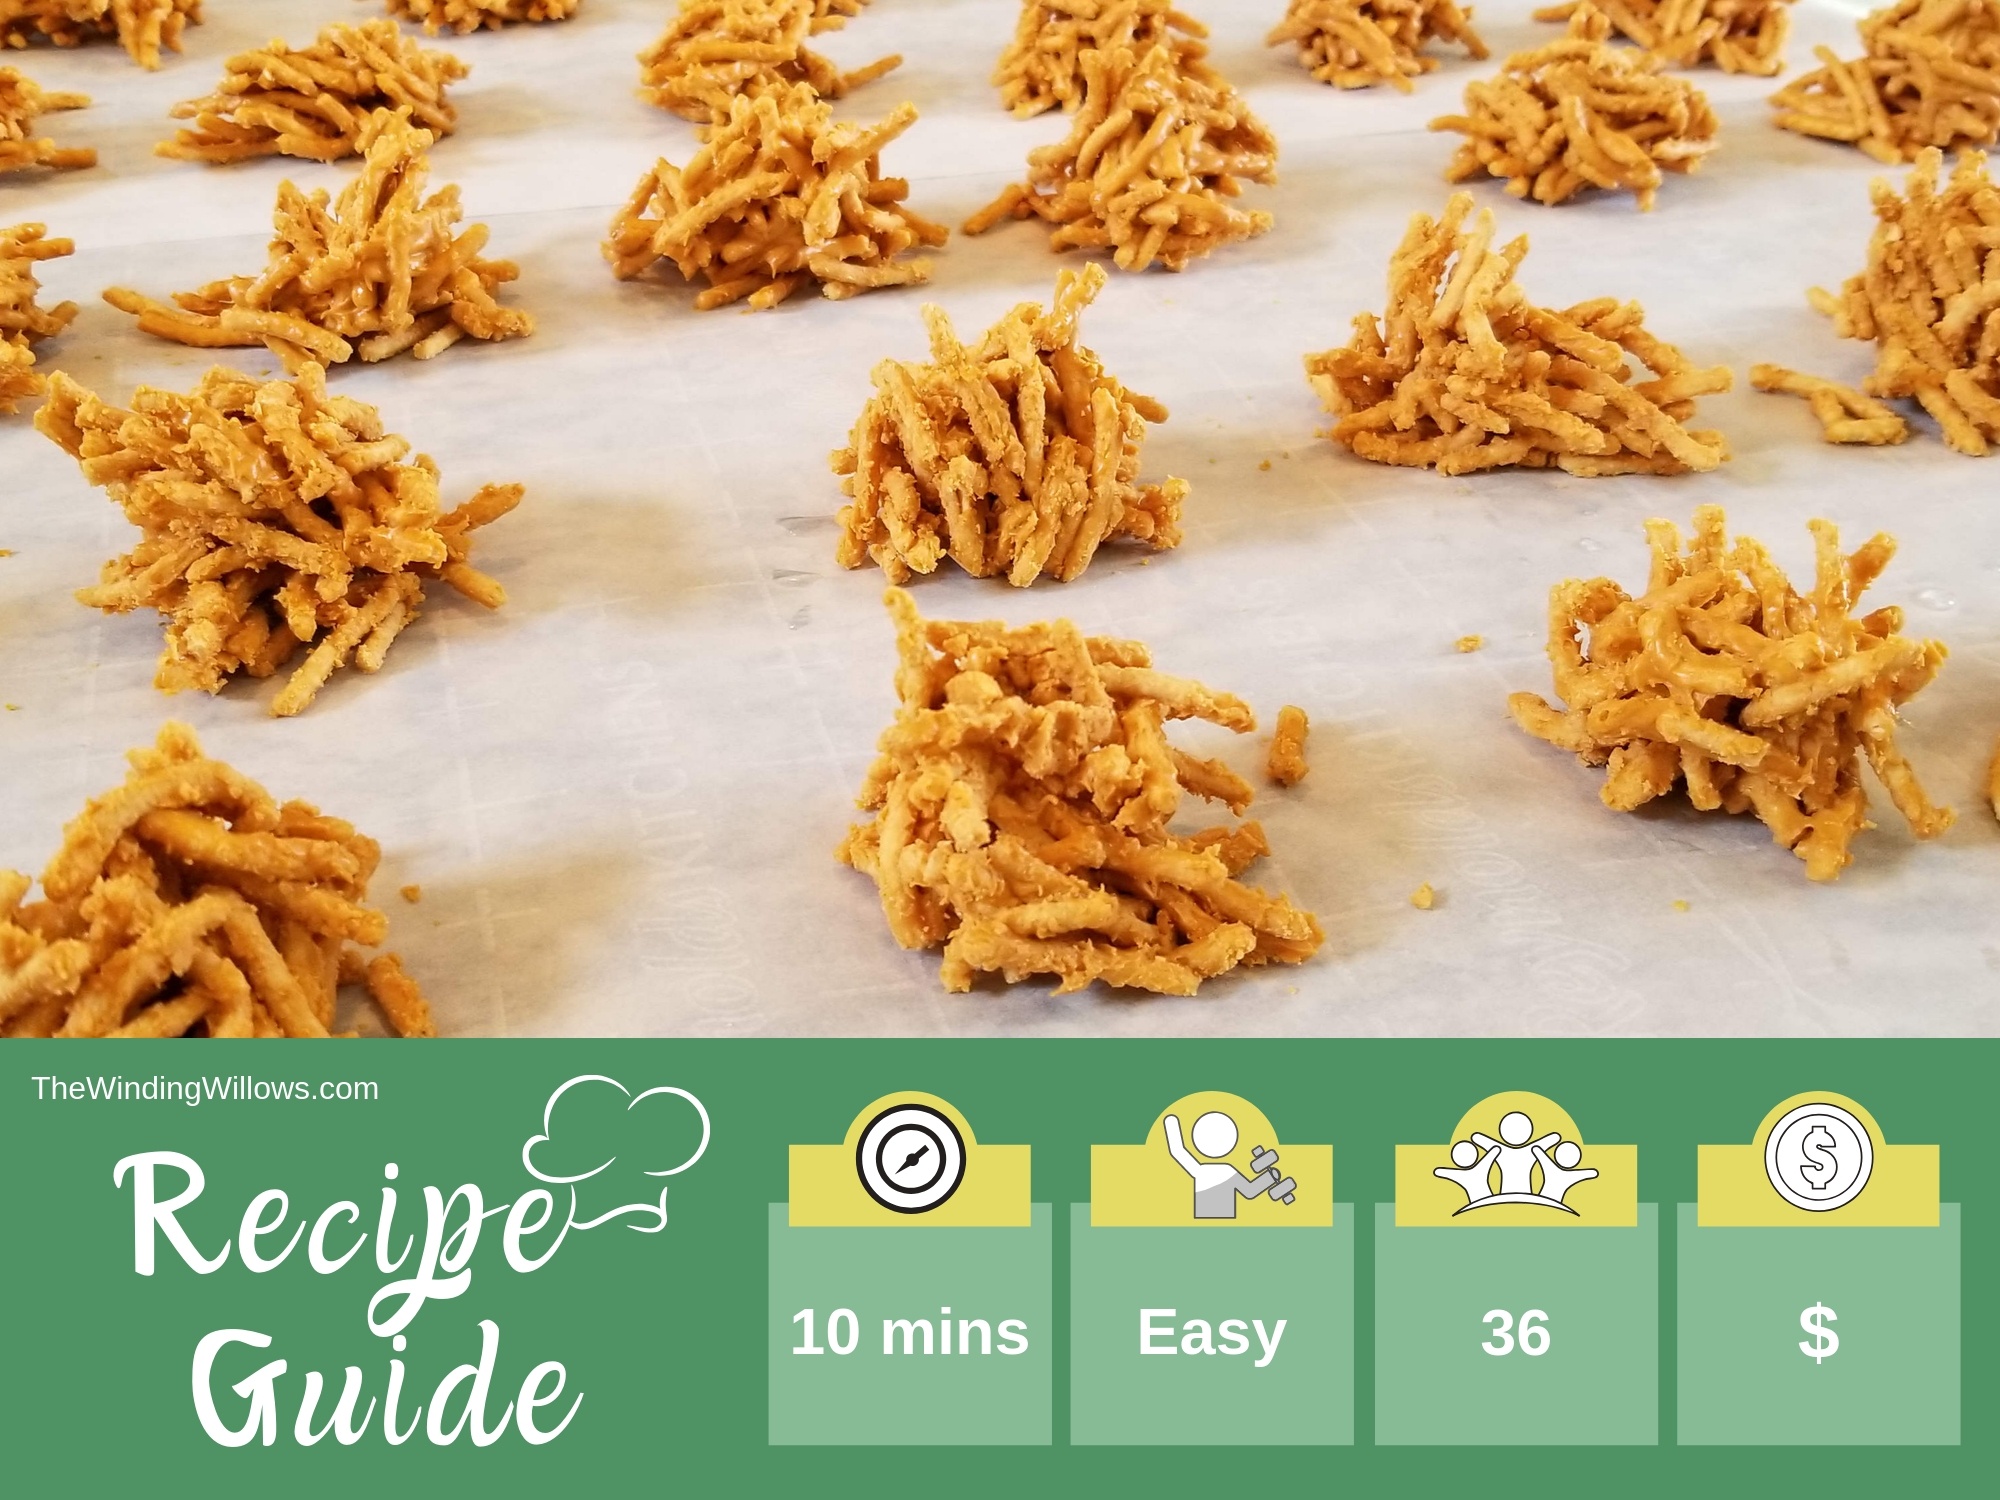 Easy 2 ingredient no-bake butterscotch haystacks. The perfect autumn treat that even the kids can help make. Stepmom | Fall cookies | Holiday Cookies #thewindingwillows